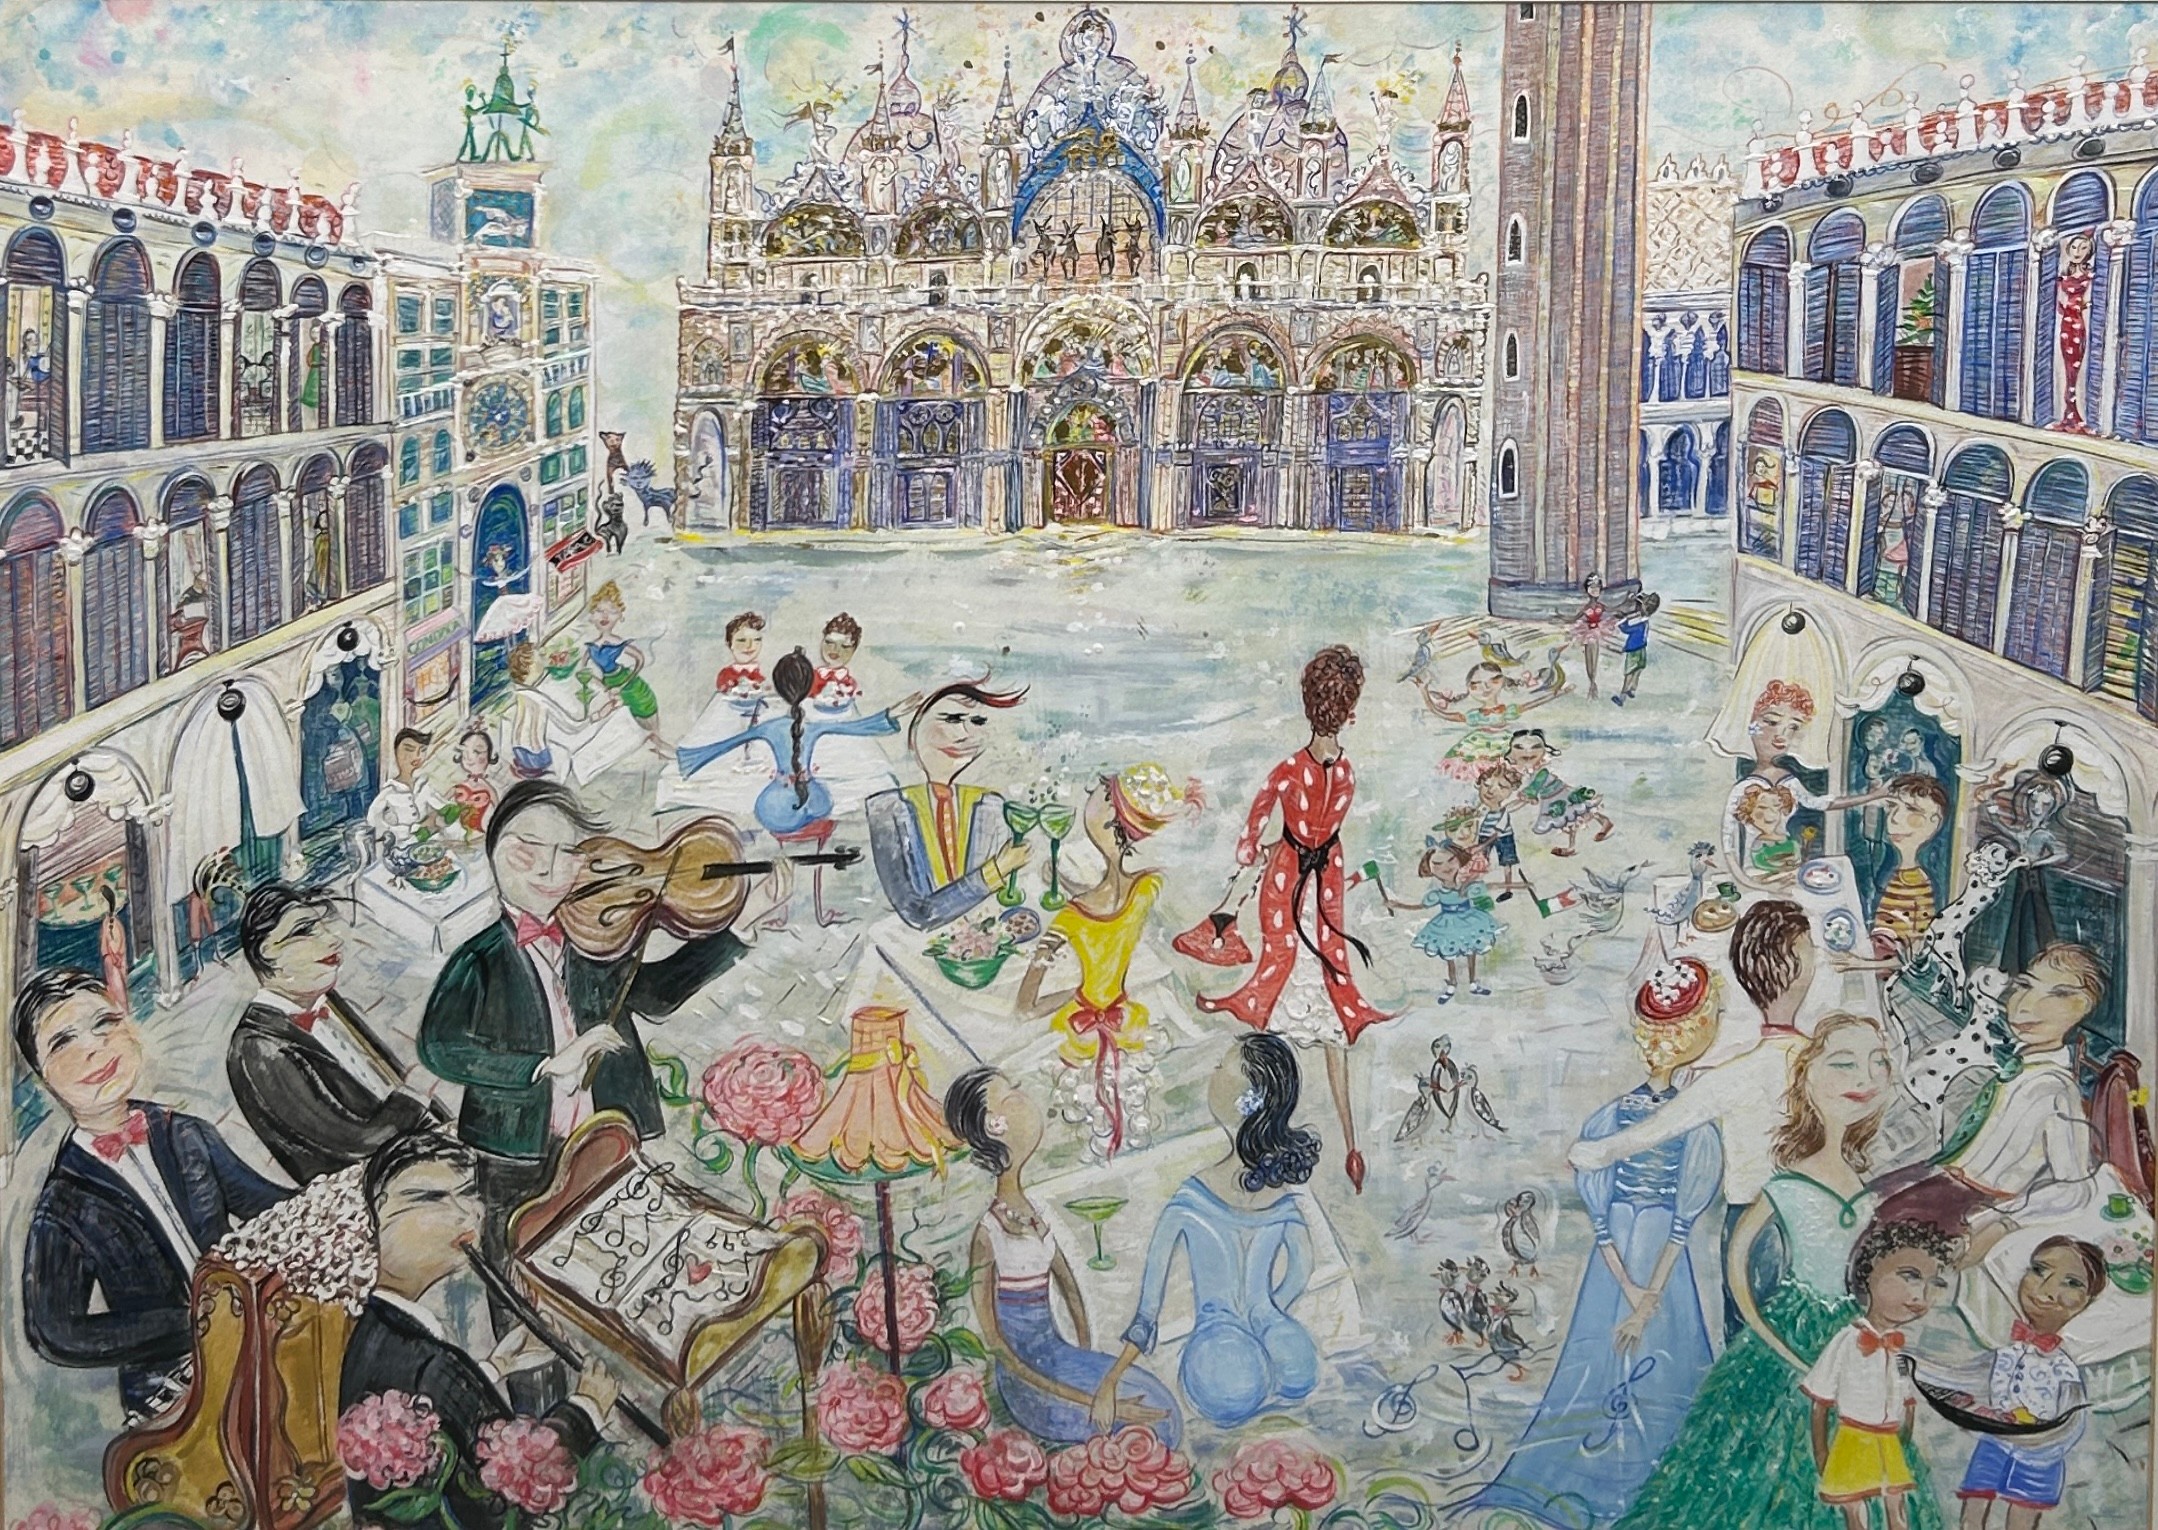 A LARGE WATERCOLOUR PAINTING ON PAPER OF MUSICIANS IN A SQUARE PROBABLY FLORENCE OR VENICE, ITALY